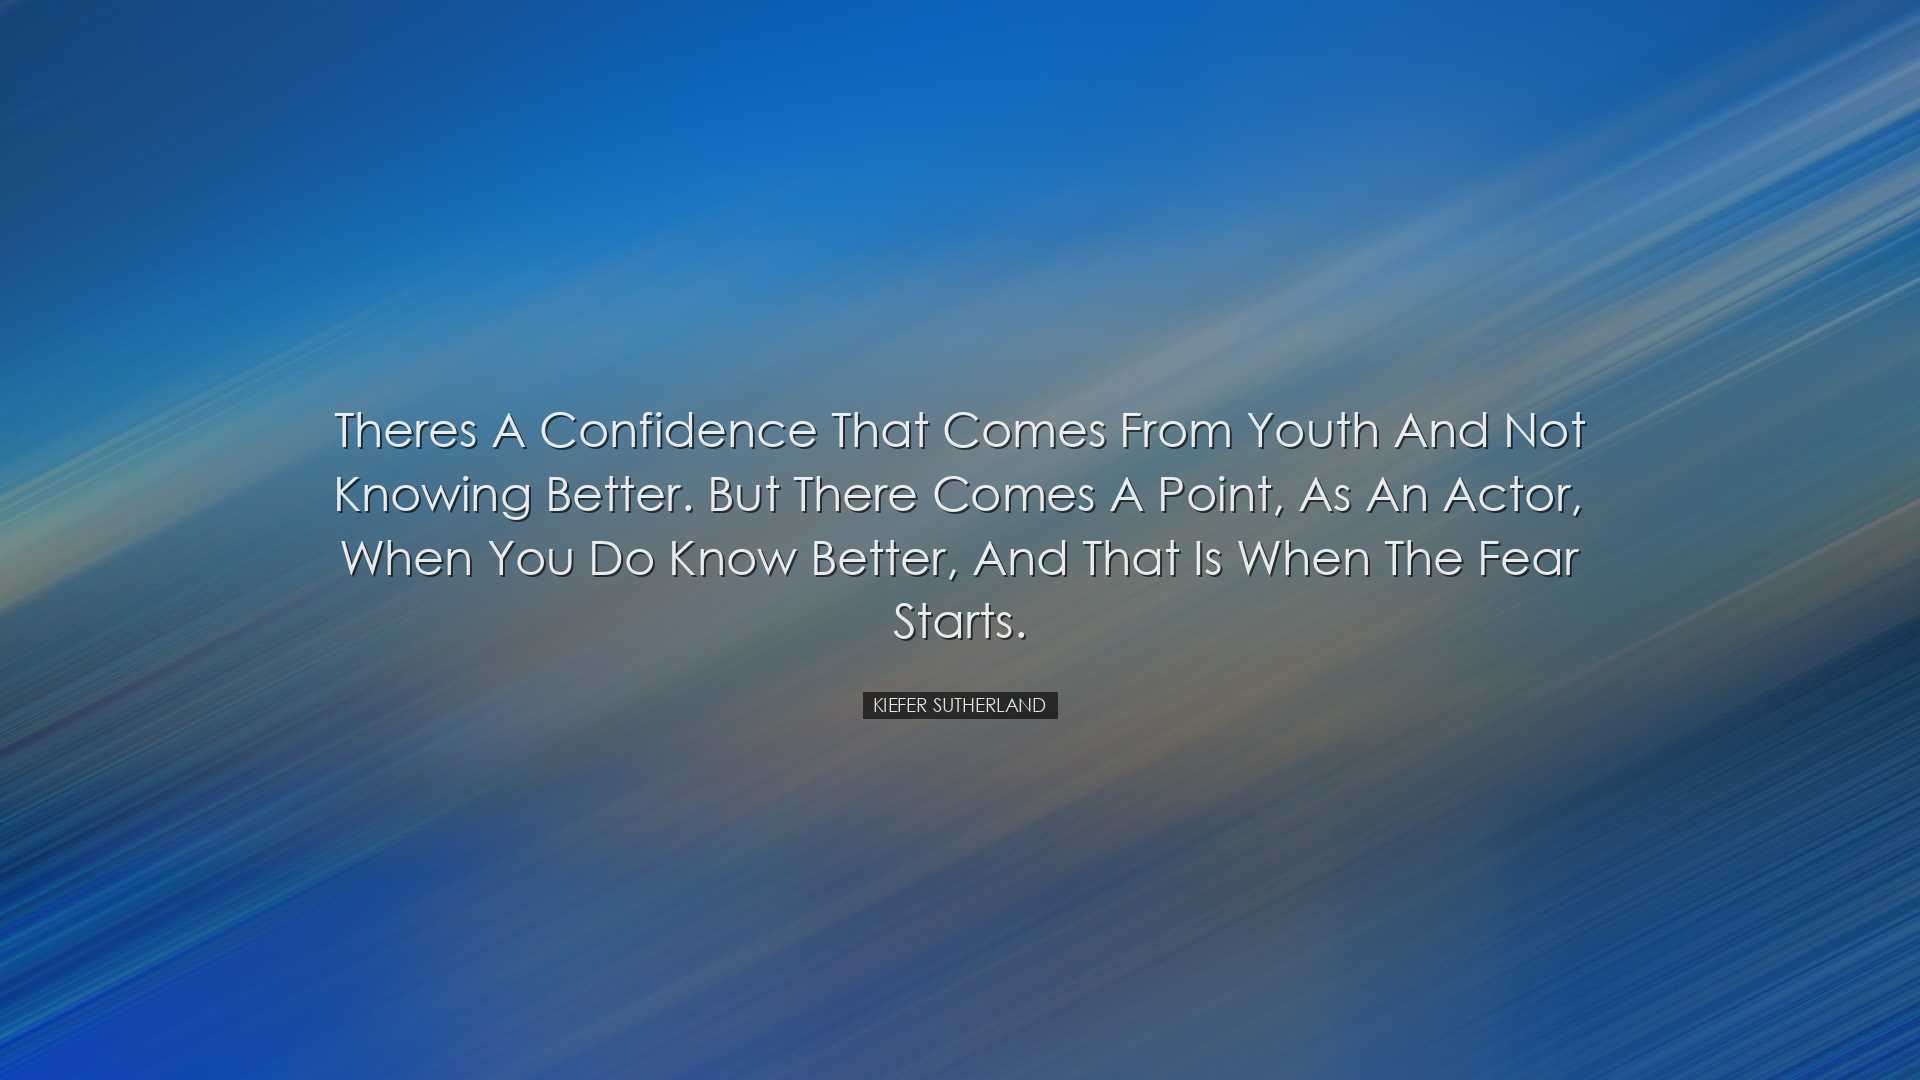 Theres a confidence that comes from youth and not knowing better.